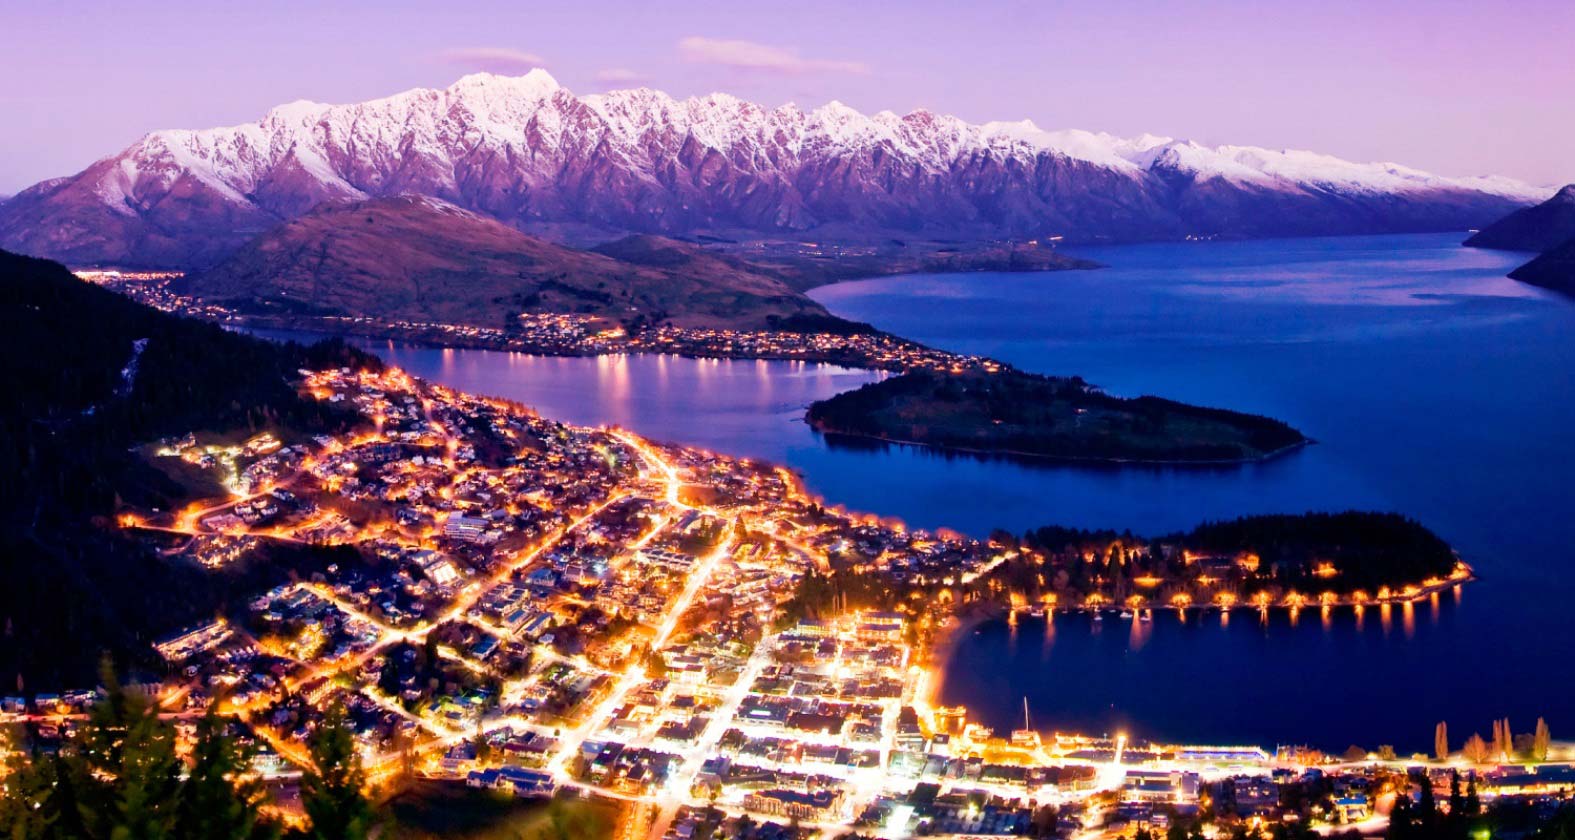 Queenstown New Zealand. Book your Queenstown Holiday. Activities. Tours. Accommodation. Transport.